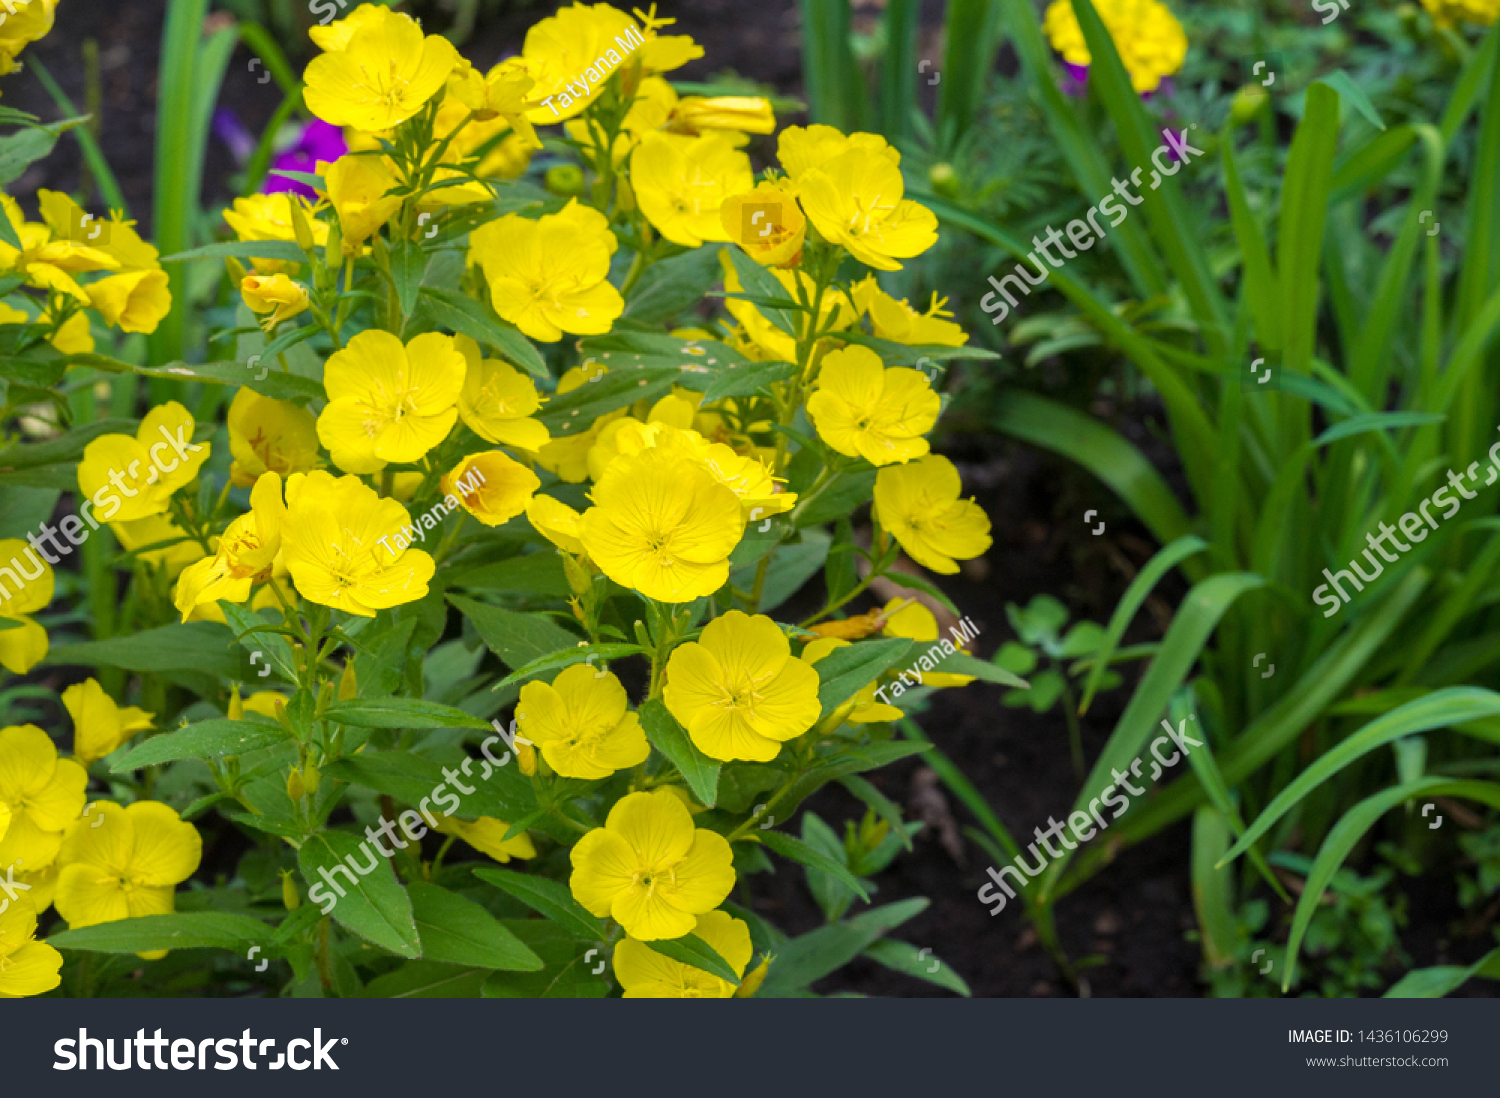 Oenothera may have originated in Mexico and Central America. Some Oenothera plants have edible parts. The roots of O. biennis are reported to be edible in young plants. #1436106299